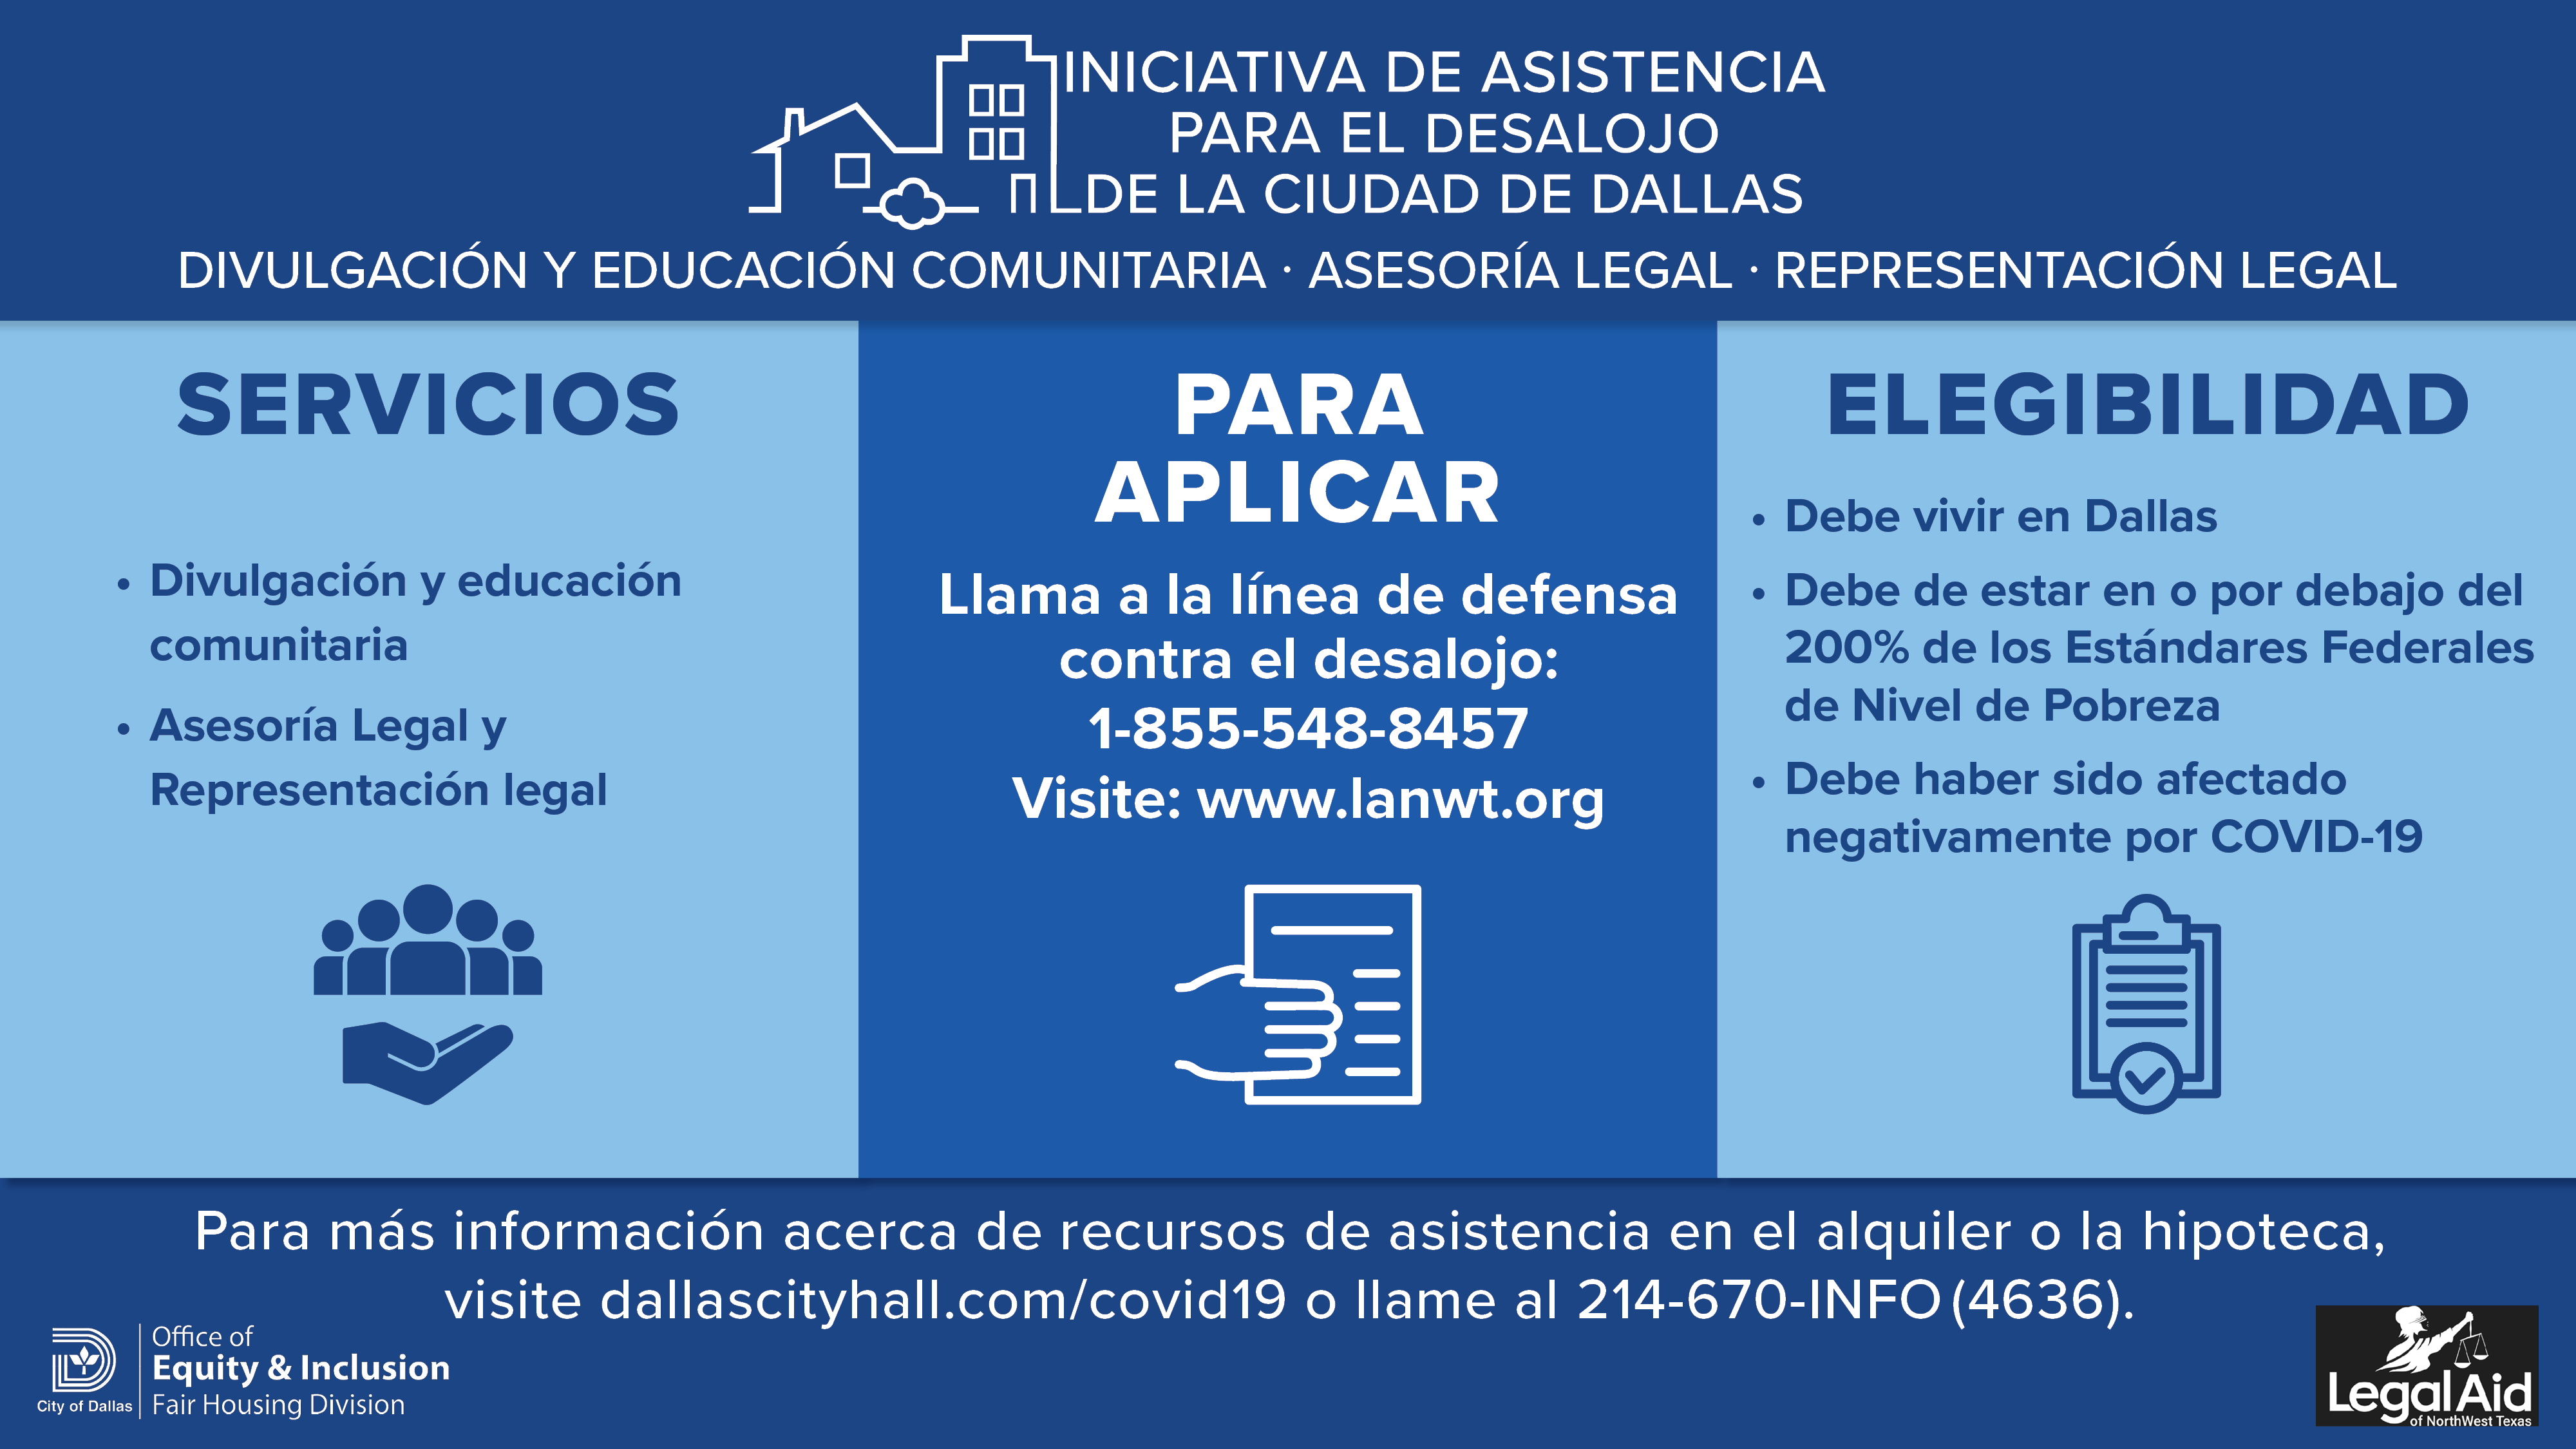 EvictionAssistanceInitiative_Social_Spanish_Final.png